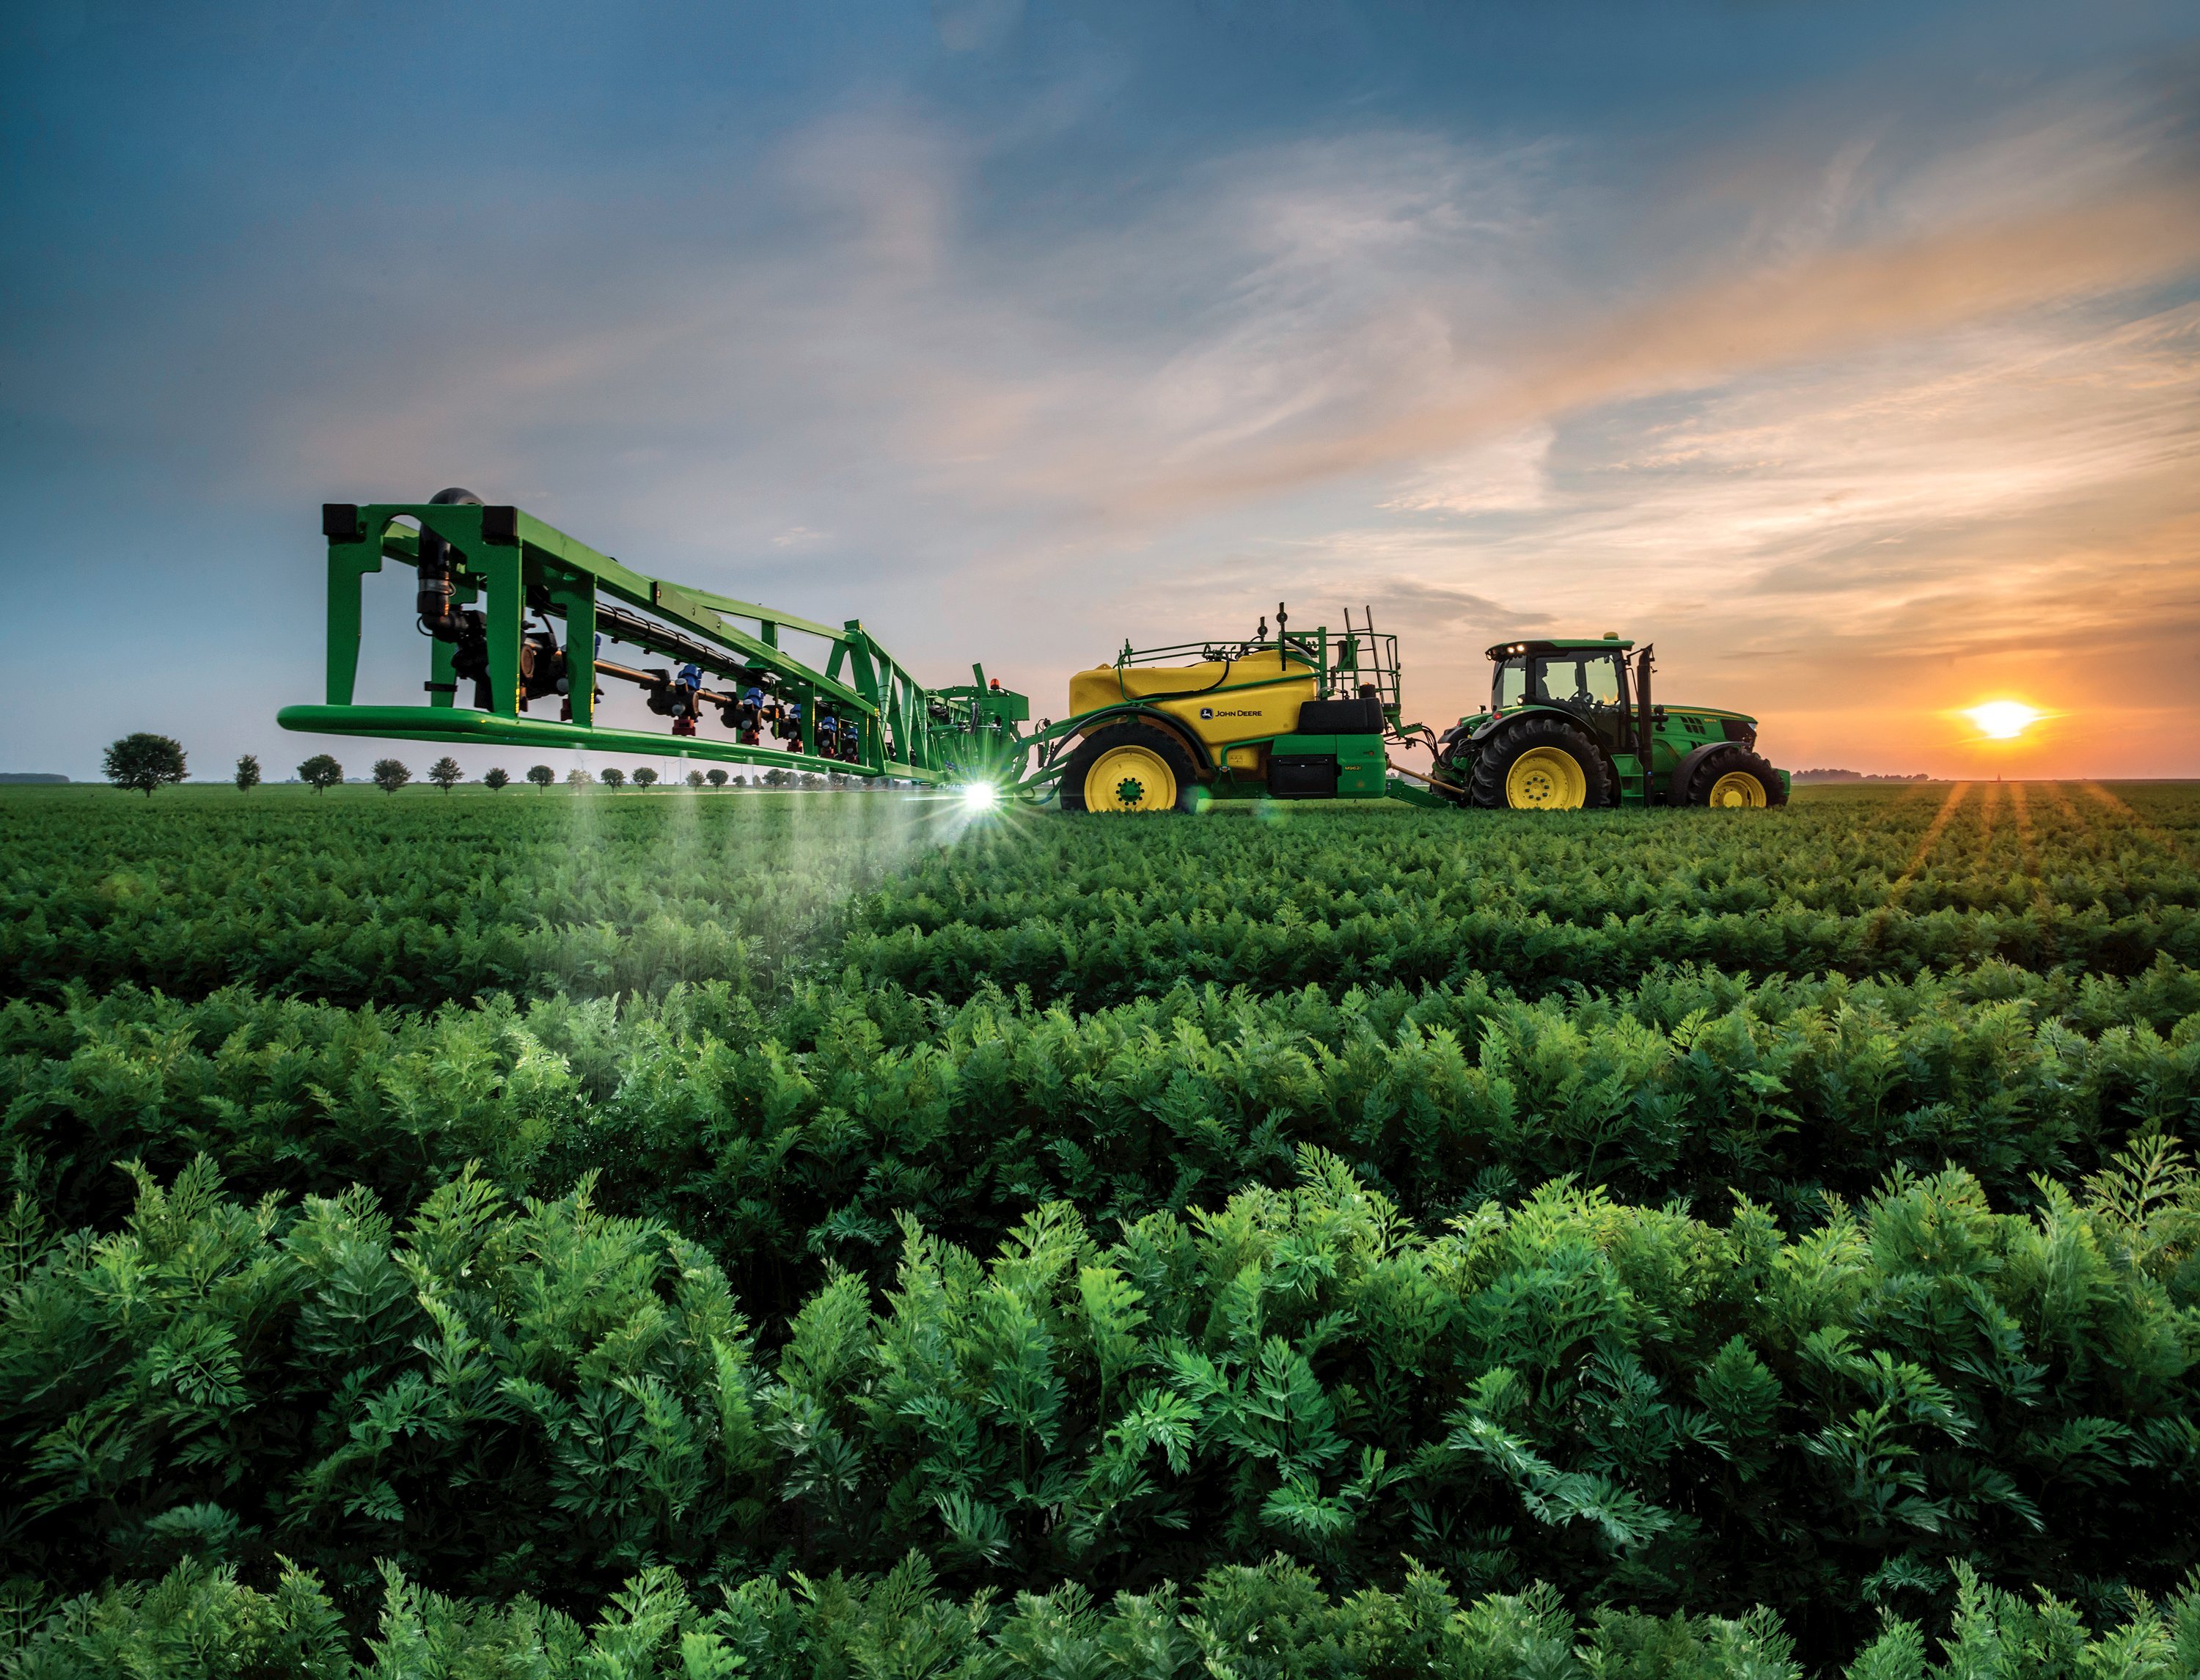 Amazing Background Picture. John Deere Super High Quality